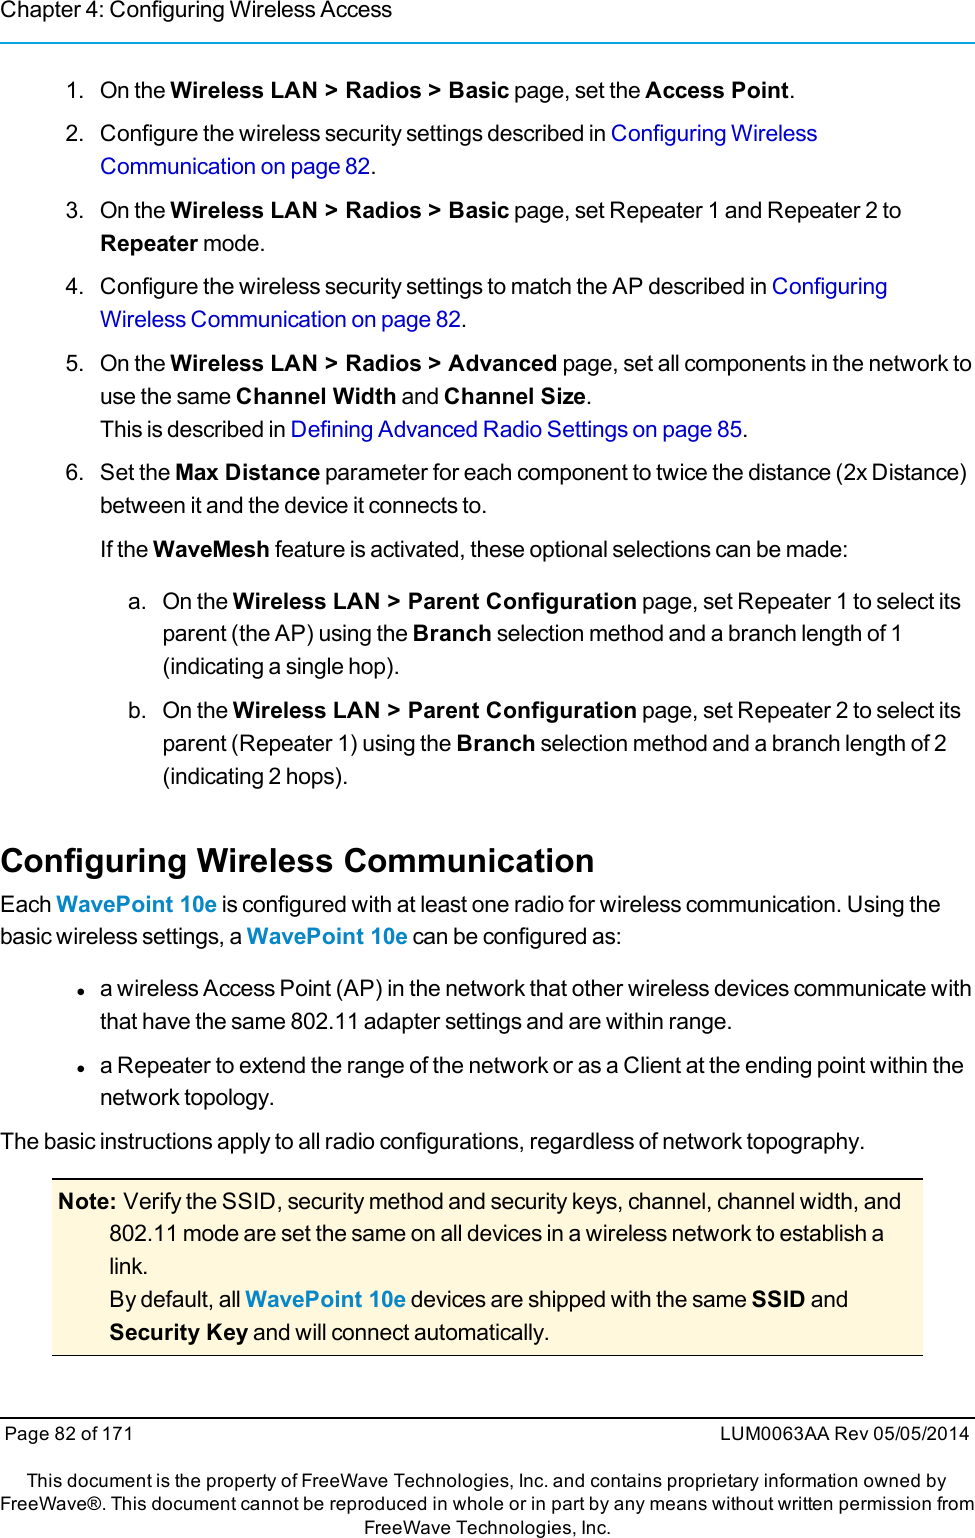 Chapter 4: Configuring Wireless Access1. On the Wireless LAN &gt; Radios &gt; Basic page, set the Access Point.2. Configure the wireless security settings described in Configuring WirelessCommunication on page 82.3. On the Wireless LAN &gt; Radios &gt; Basic page, set Repeater 1 and Repeater 2 toRepeater mode.4. Configure the wireless security settings to match the AP described in ConfiguringWireless Communication on page 82.5. On the Wireless LAN &gt; Radios &gt; Advanced page, set all components in the network touse the same Channel Width and Channel Size.This is described in Defining Advanced Radio Settings on page 85.6. Set the Max Distance parameter for each component to twice the distance (2x Distance)between it and the device it connects to.If the WaveMesh feature is activated, these optional selections can be made:a. On the Wireless LAN &gt; Parent Configuration page, set Repeater 1 to select itsparent (the AP) using the Branch selection method and a branch length of 1(indicating a single hop).b. On the Wireless LAN &gt; Parent Configuration page, set Repeater 2 to select itsparent (Repeater 1) using the Branch selection method and a branch length of 2(indicating 2 hops).Configuring Wireless CommunicationEach WavePoint 10e is configured with at least one radio for wireless communication. Using thebasic wireless settings, a WavePoint 10e can be configured as:la wireless Access Point (AP) in the network that other wireless devices communicate withthat have the same 802.11 adapter settings and are within range.la Repeater to extend the range of the network or as a Client at the ending point within thenetwork topology.The basic instructions apply to all radio configurations, regardless of network topography.Note: Verify the SSID, security method and security keys, channel, channel width, and802.11 mode are set the same on all devices in a wireless network to establish alink.By default, all WavePoint 10e devices are shipped with the same SSID andSecurity Key and will connect automatically.Page 82 of 171 LUM0063AA Rev 05/05/2014This document is the property of FreeWave Technologies, Inc. and contains proprietary information owned byFreeWave®. This document cannot be reproduced in whole or in part by any means without written permission fromFreeWave Technologies, Inc.